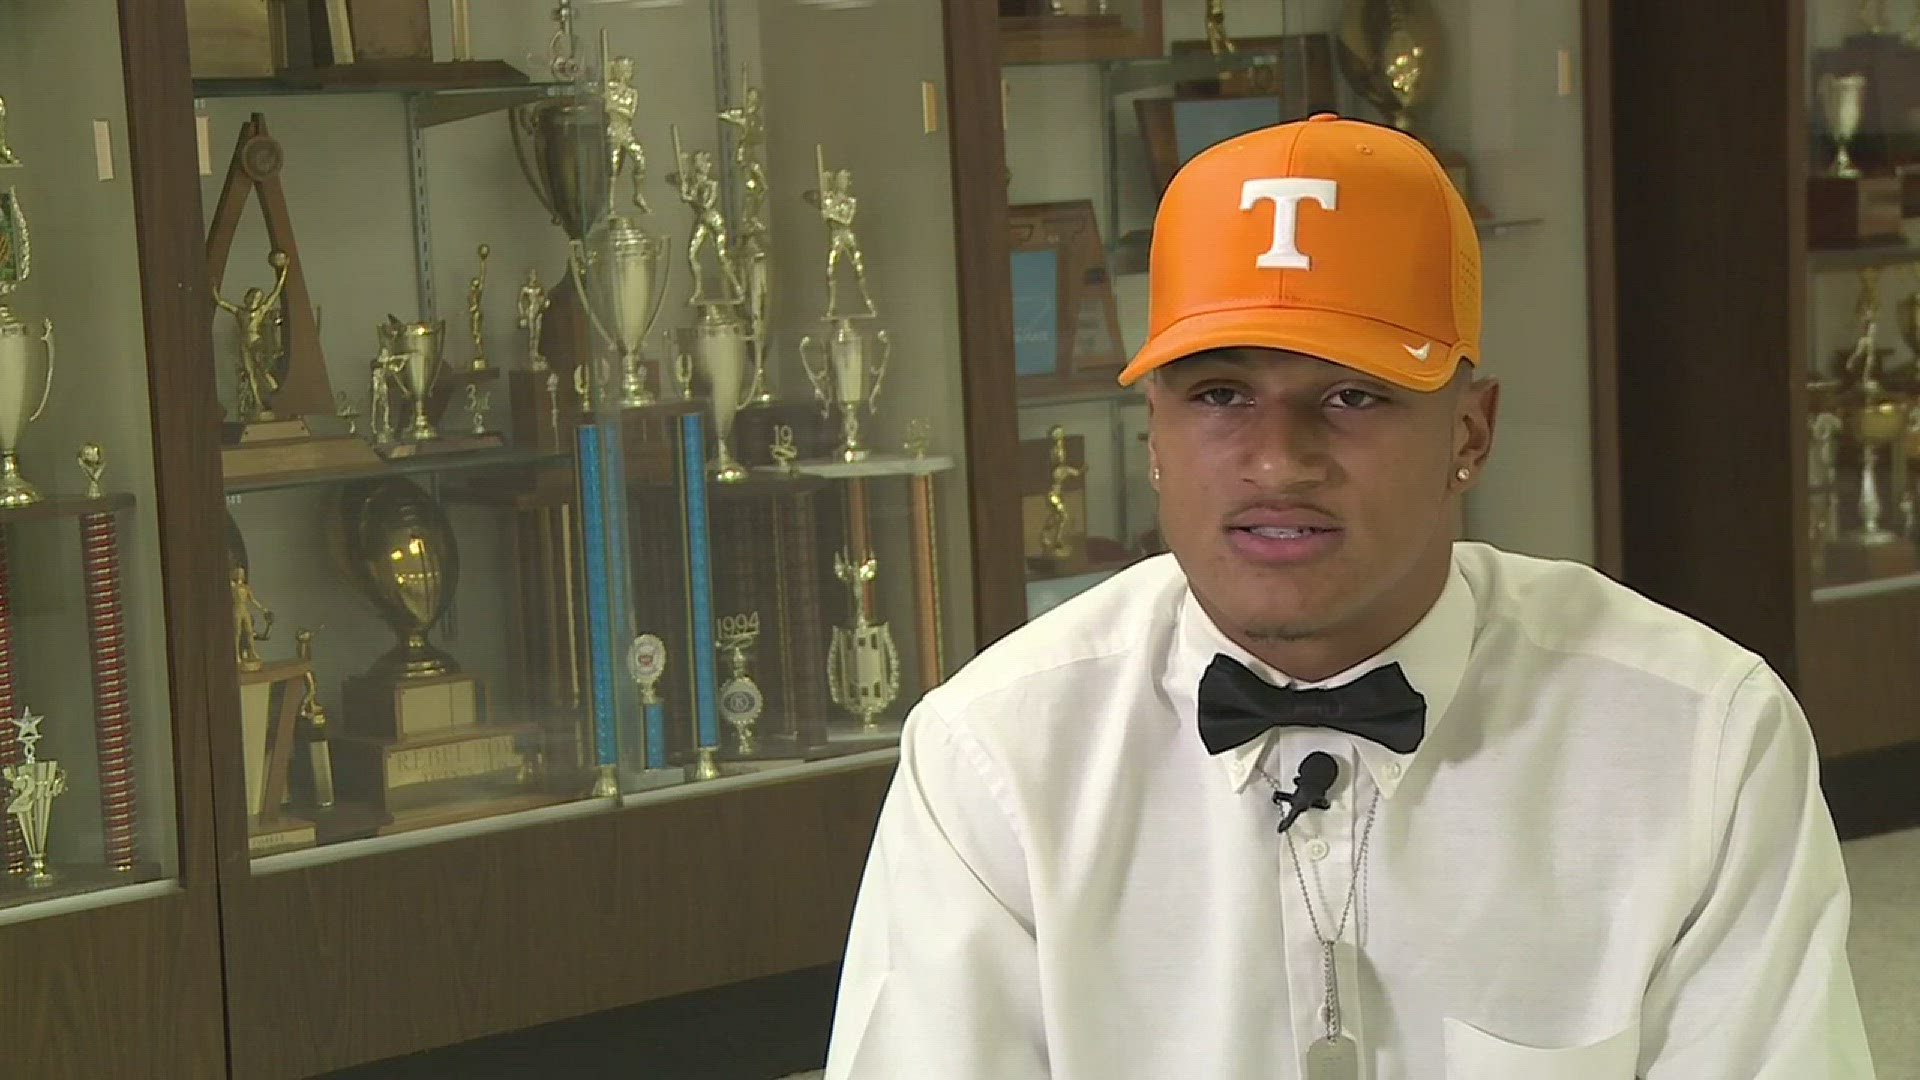 Four-star in-state wide receiver Alontae Taylor signed with Tennessee on Friday and dedicated the day to his grandmother, who passed away in 2009.